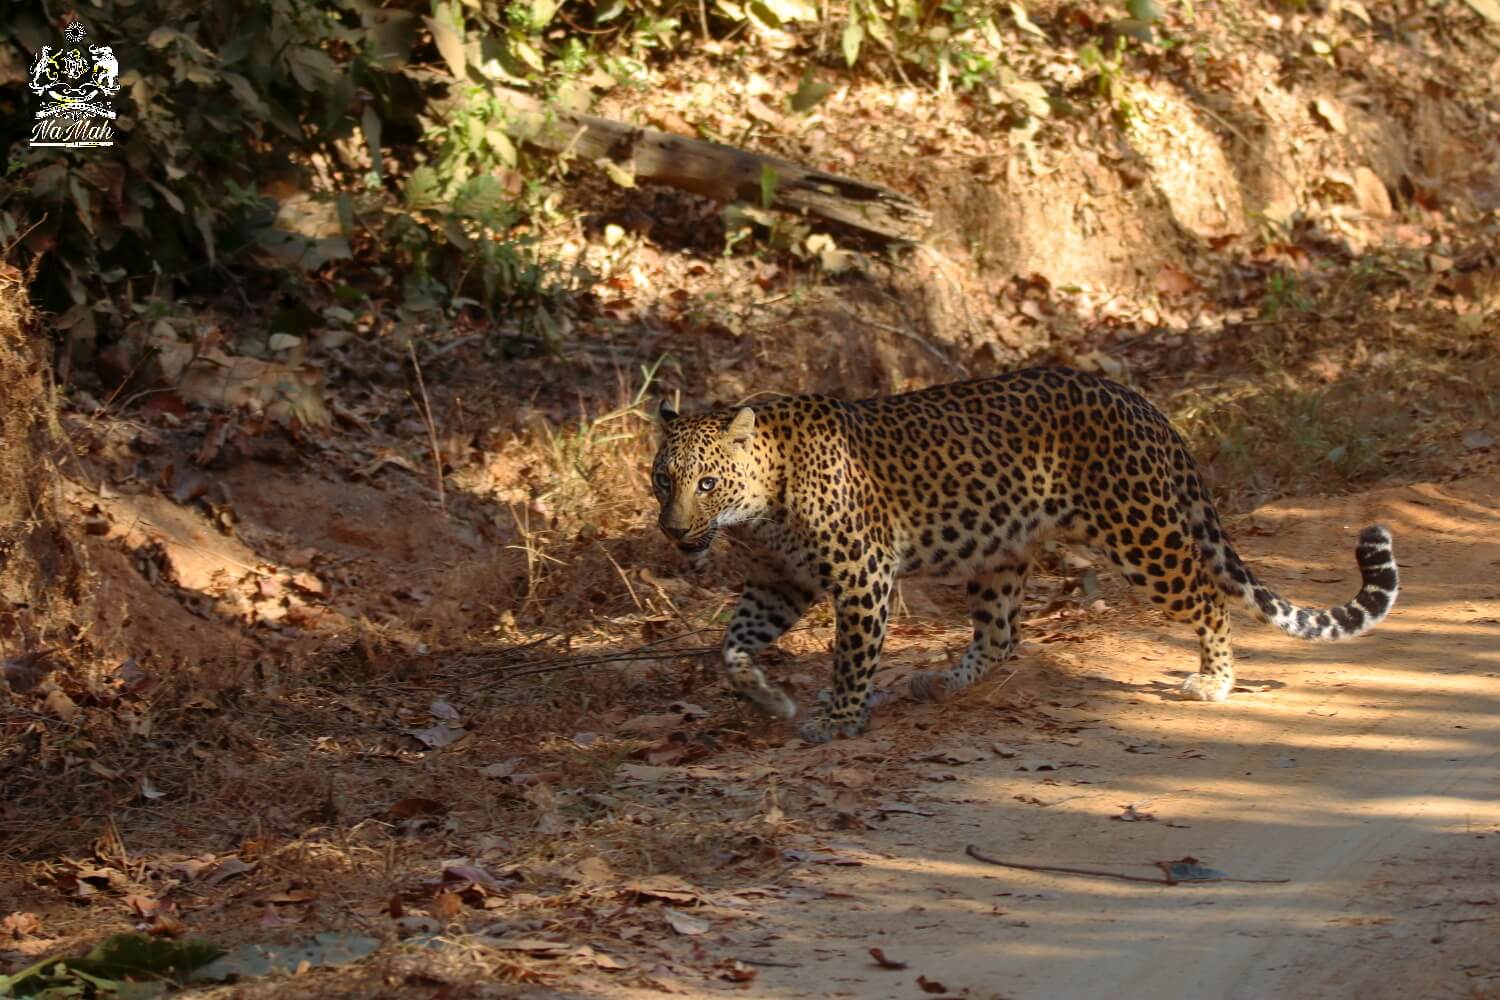 Leopard crossing road in national park
